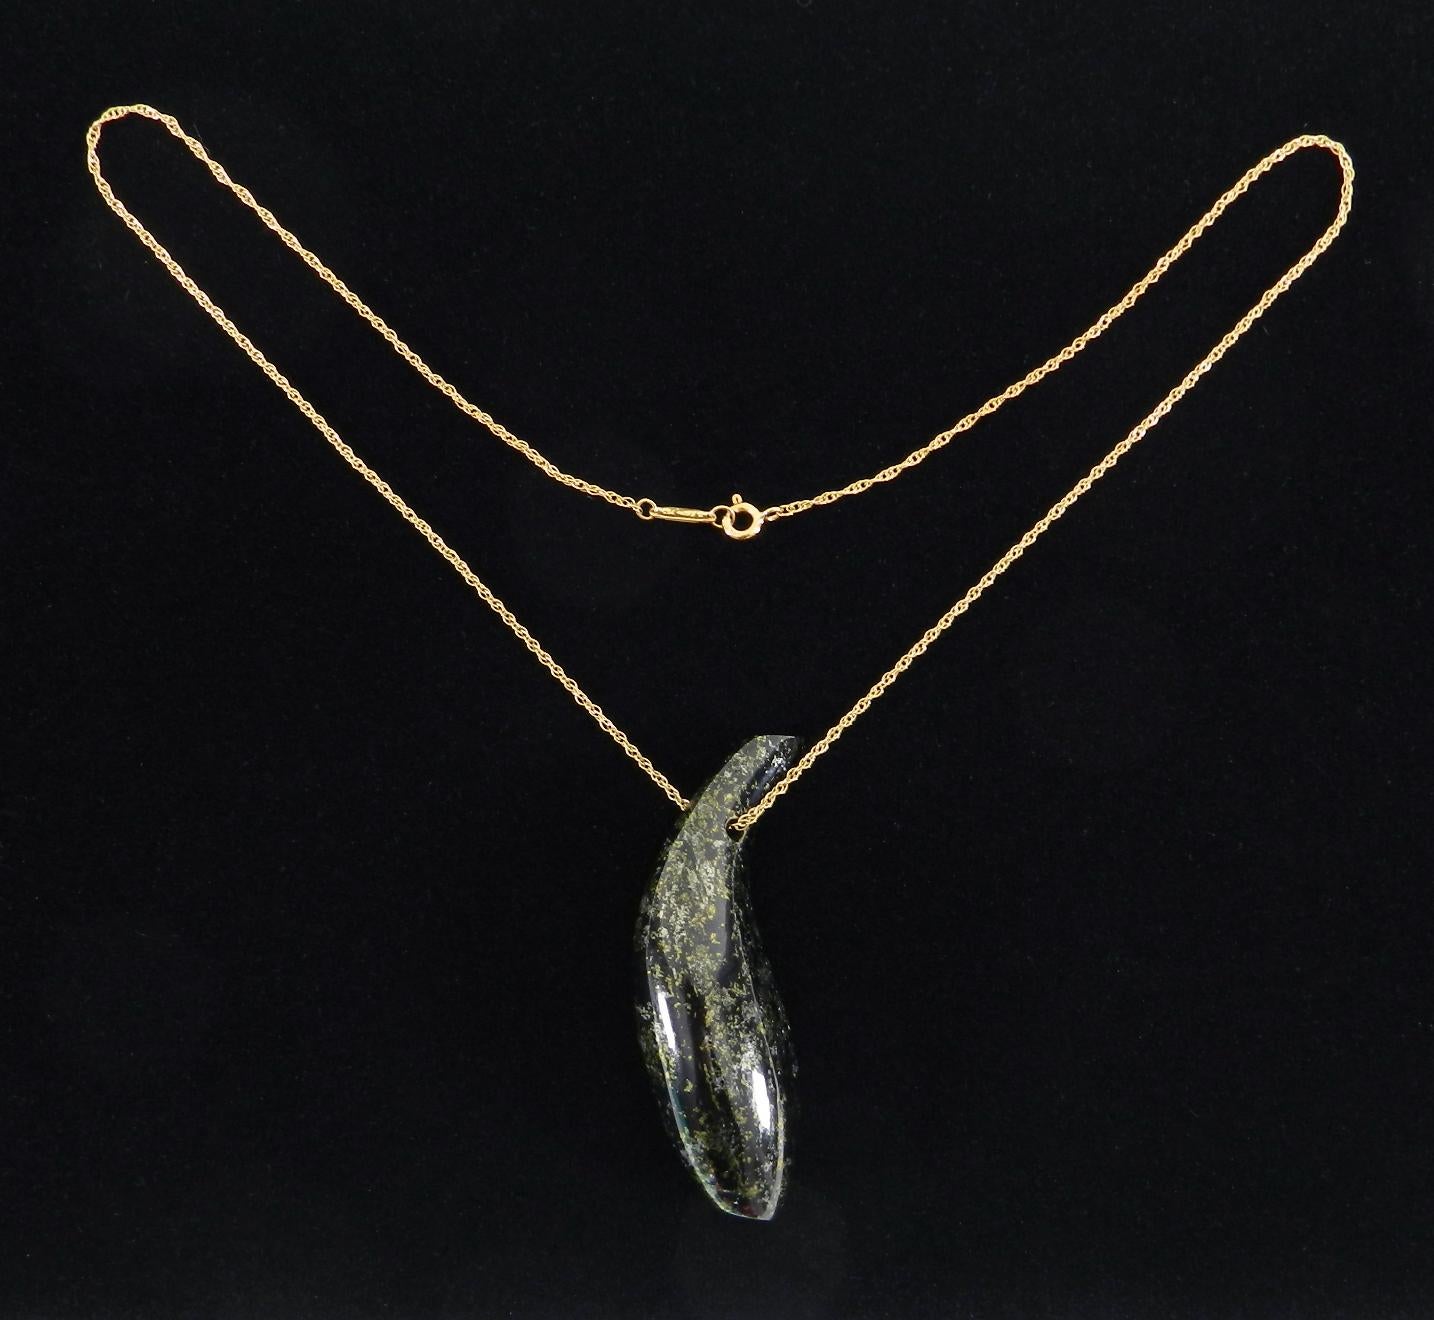 Tiffany and Co. x Frank Gehry 18k Gold and Jade Fish Pendant Necklace.  Heavy polished jade abstract fish pendant on a 17.5” long 18k gold chain necklace.  Pendant measures about 2-⅜” x 0.75”. Excellent pre-owned condition.
